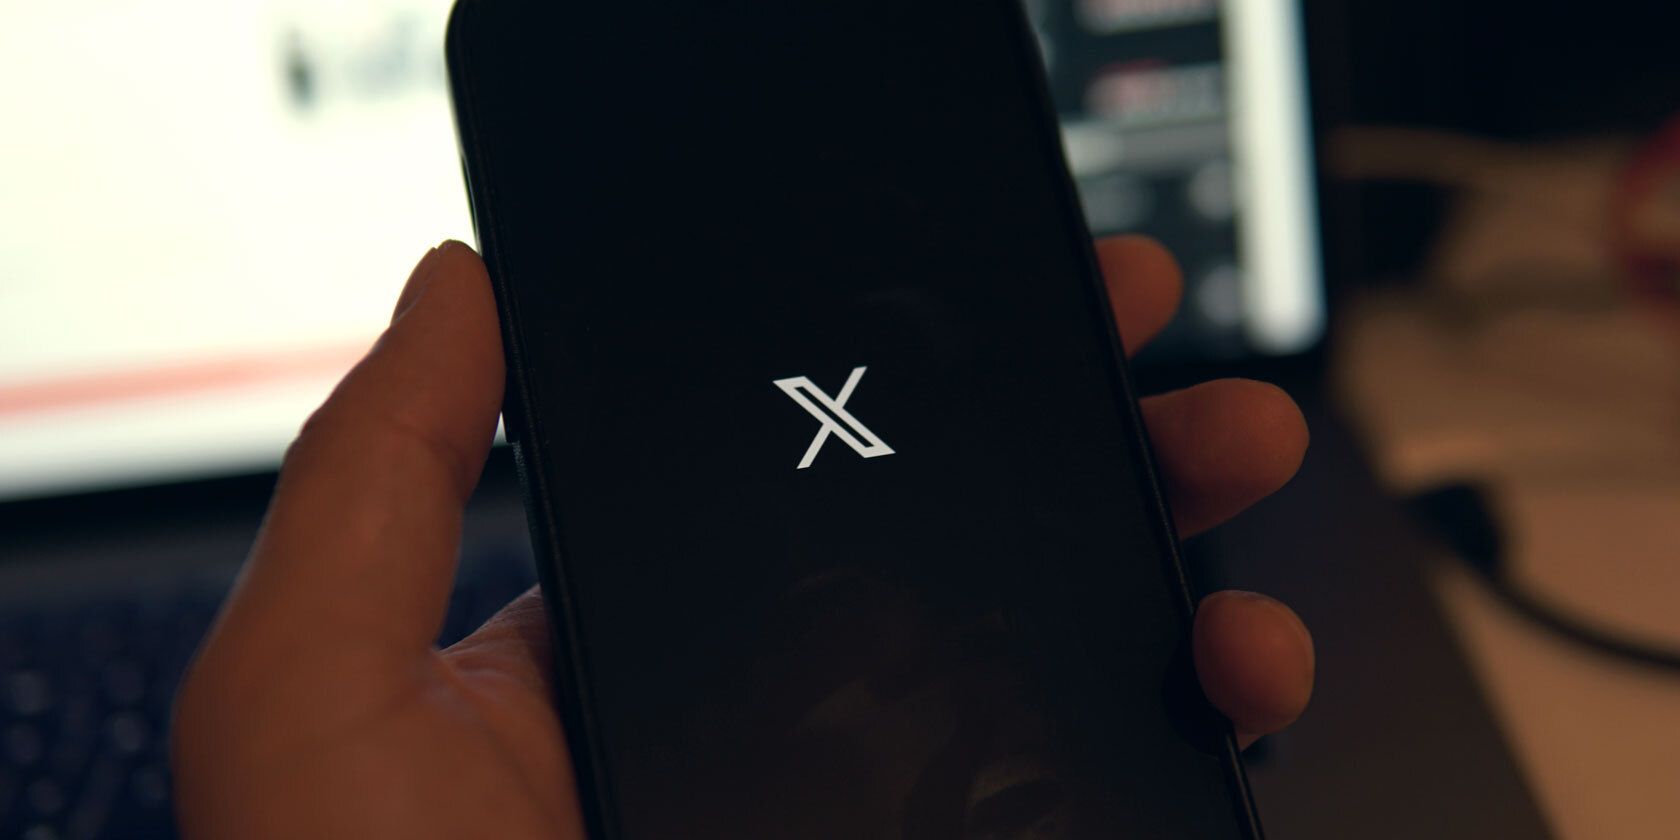 the x twitter logo on a smartphone